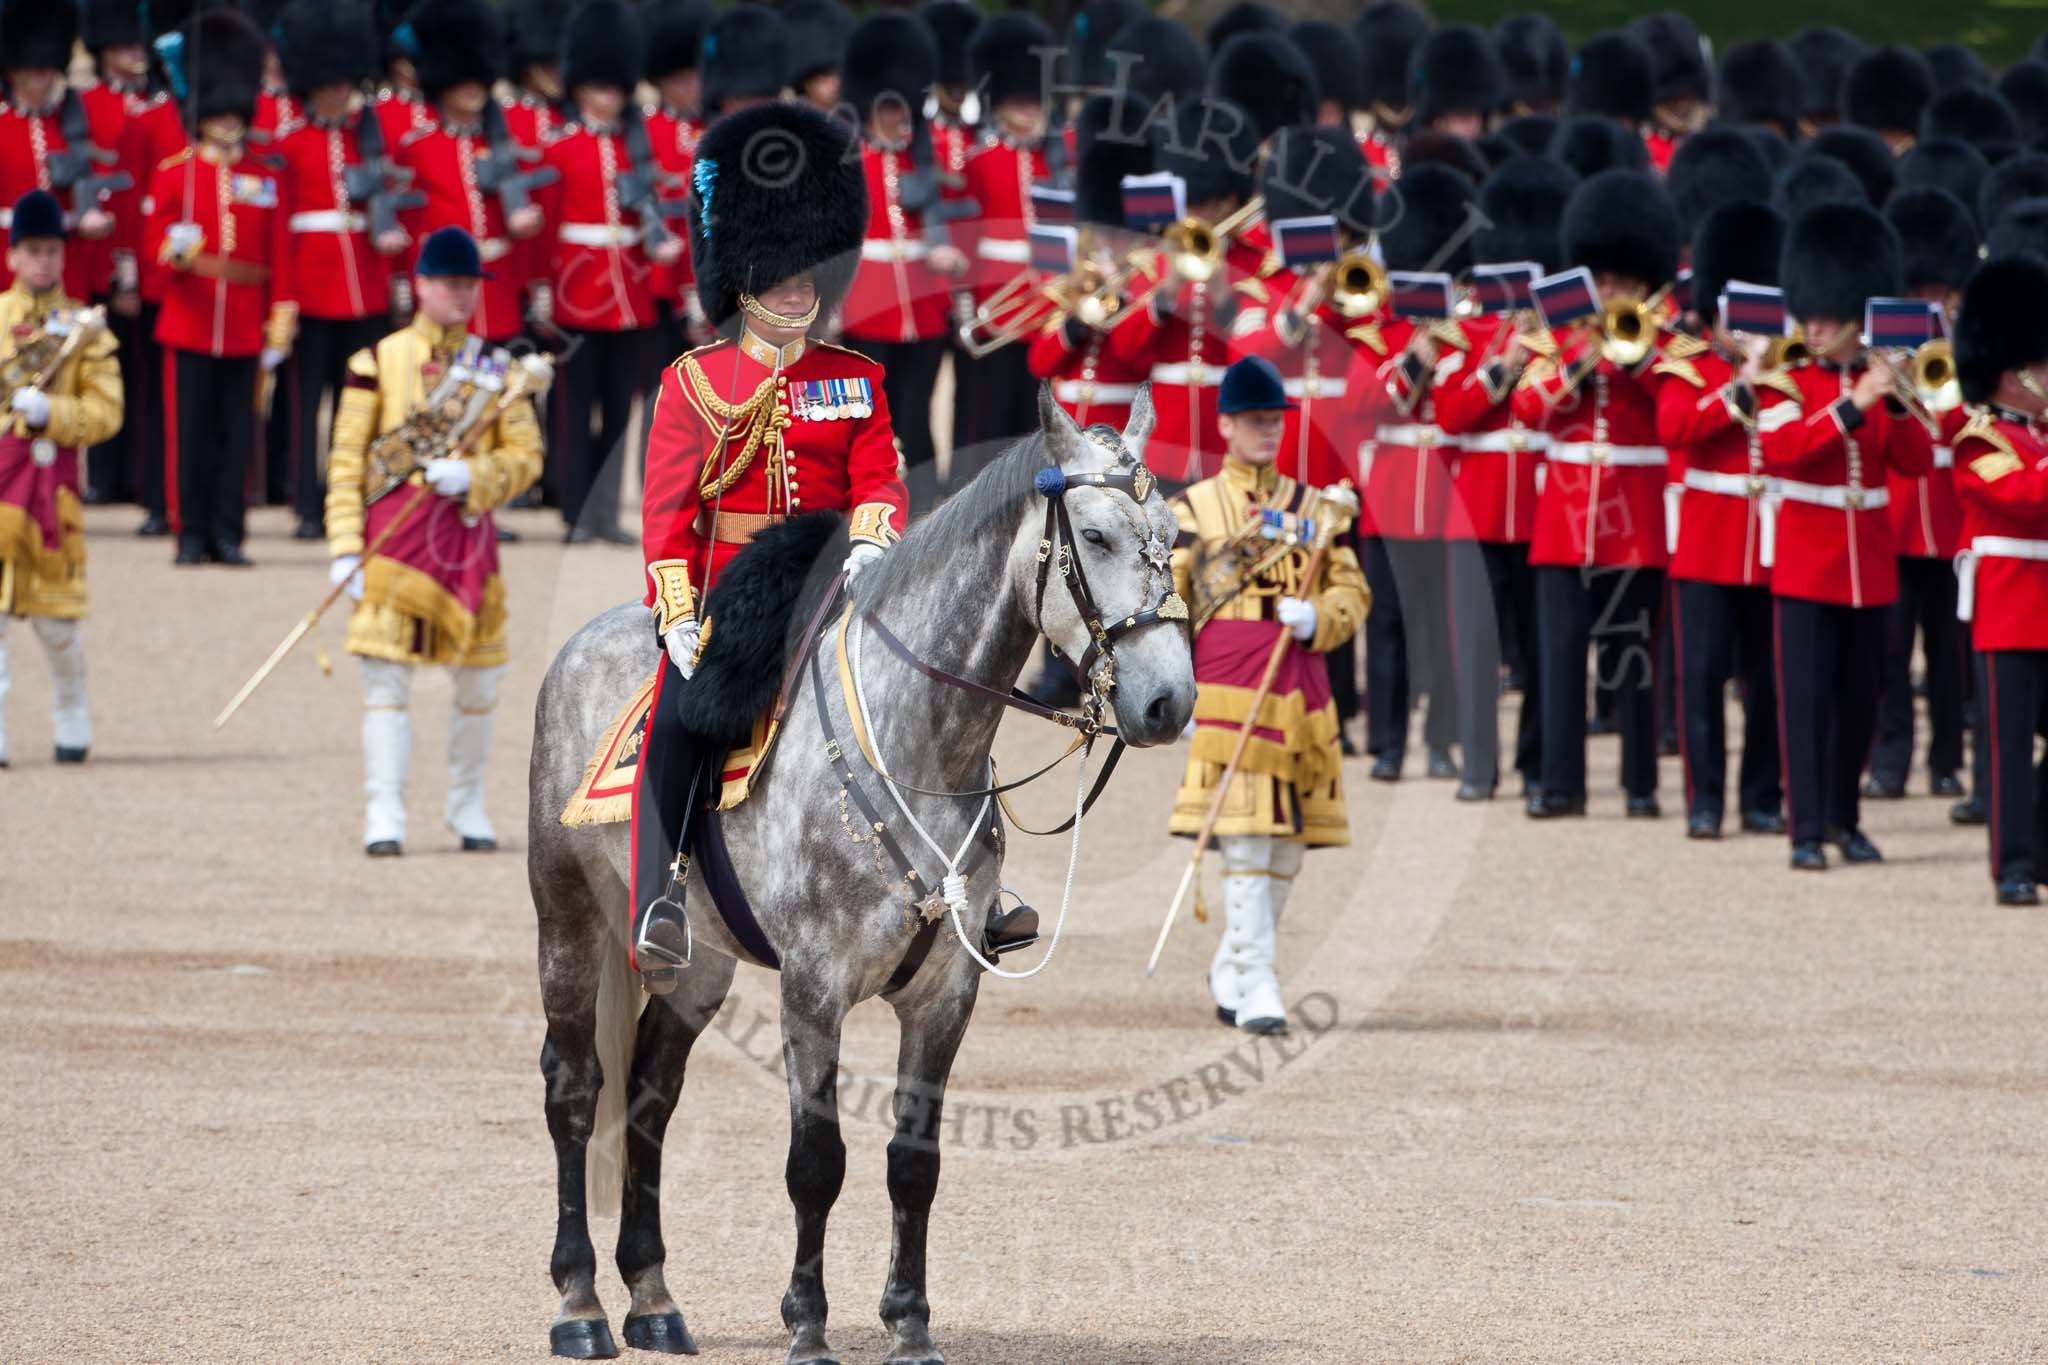 Trooping the Colour 2009: The Field Officer in Brigade Waiting, Lieutenant Colonel B C Farrell, on 'Wellesley', behind him the Massed Bands marching..
Horse Guards Parade, Westminster,
London SW1,

United Kingdom,
on 13 June 2009 at 11:23, image #192